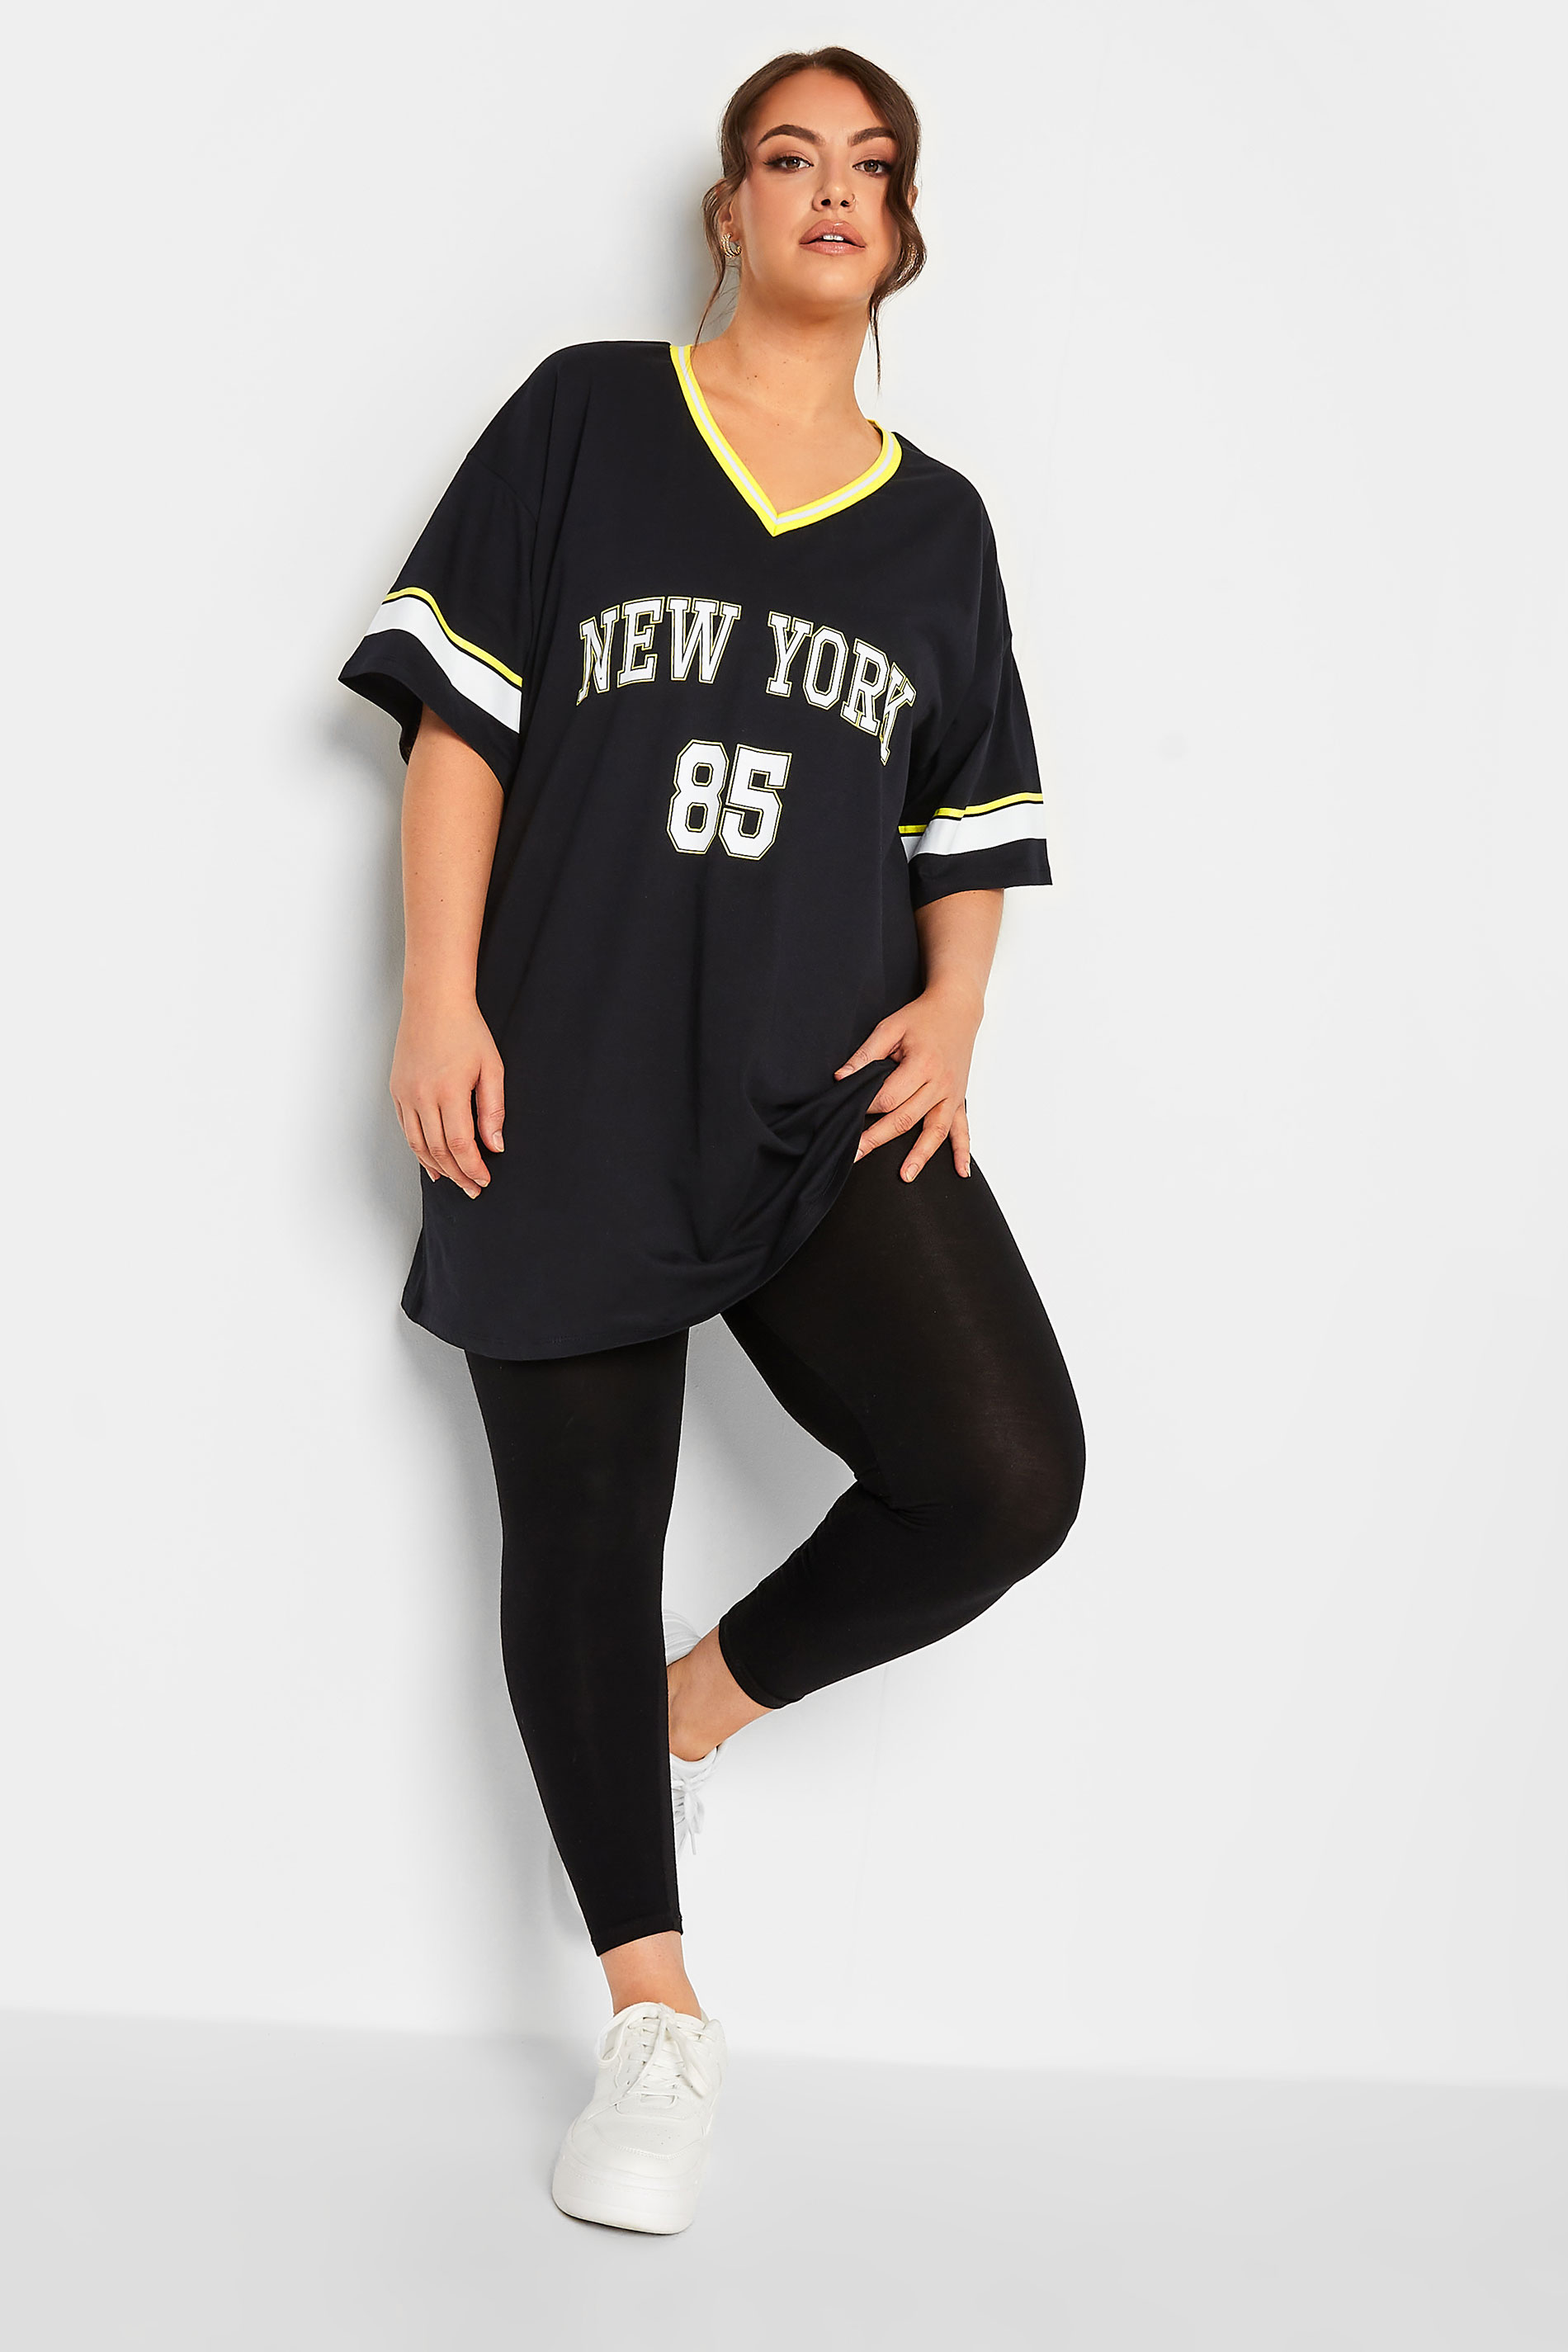 YOURS Curve Black and Yellow 'New York' Slogan Varsity Tunic Top | Yours Clothing 2